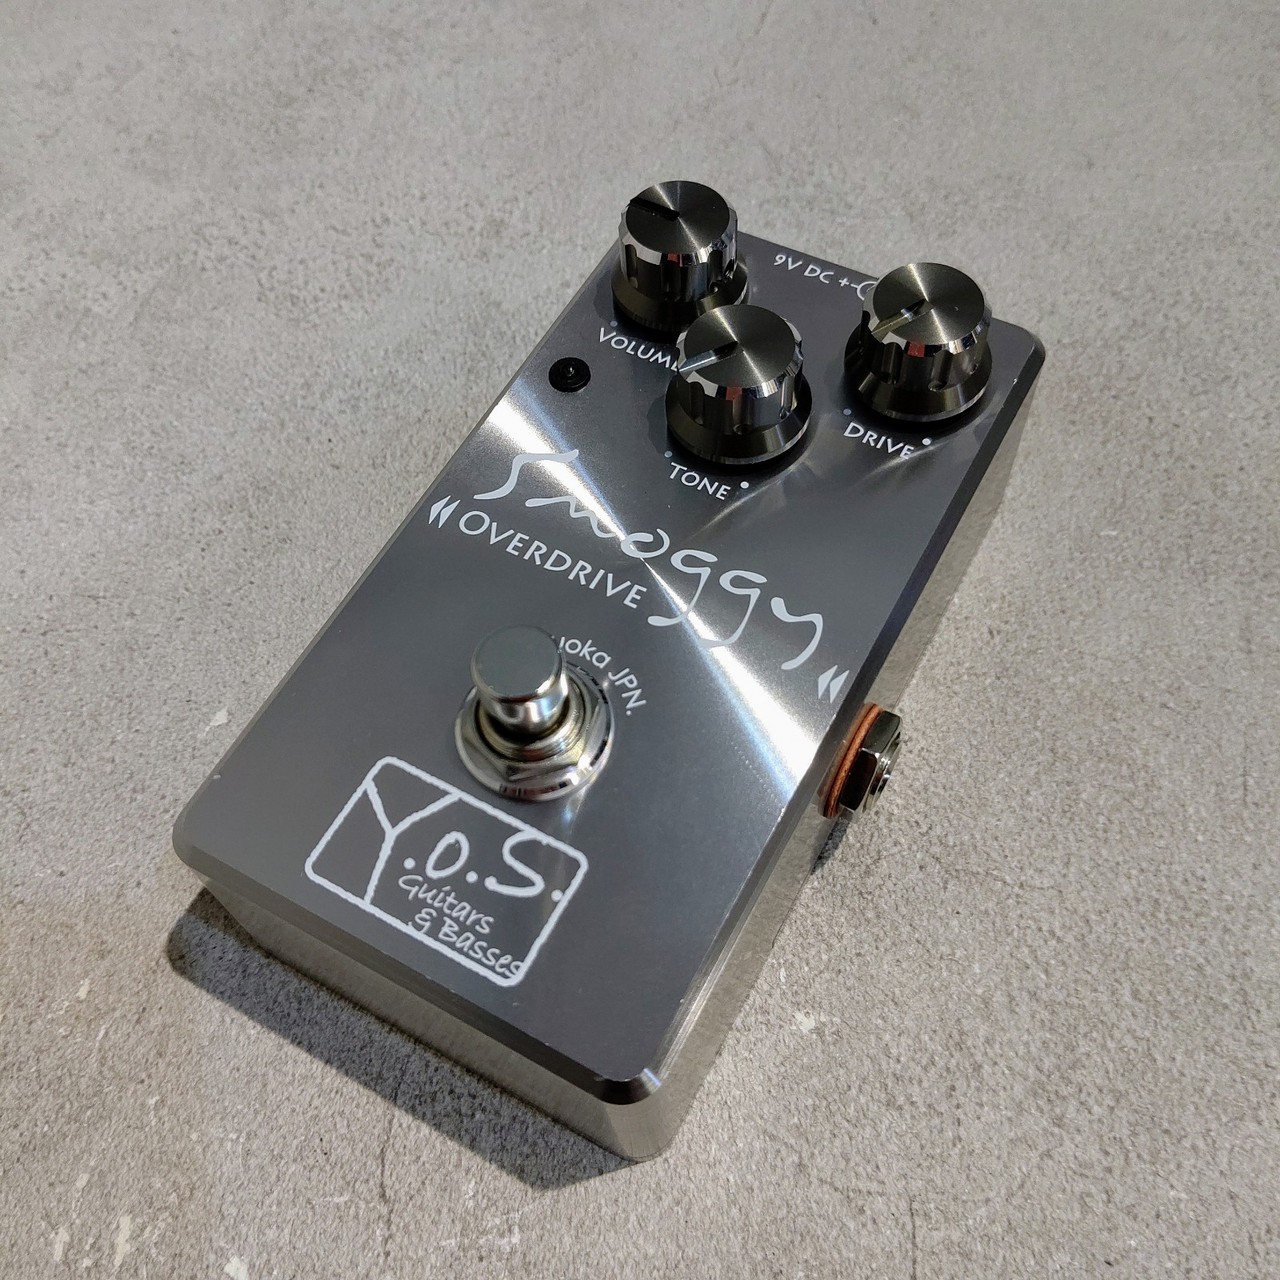 Y.O.S smoggy overdrive sbdonline2.net